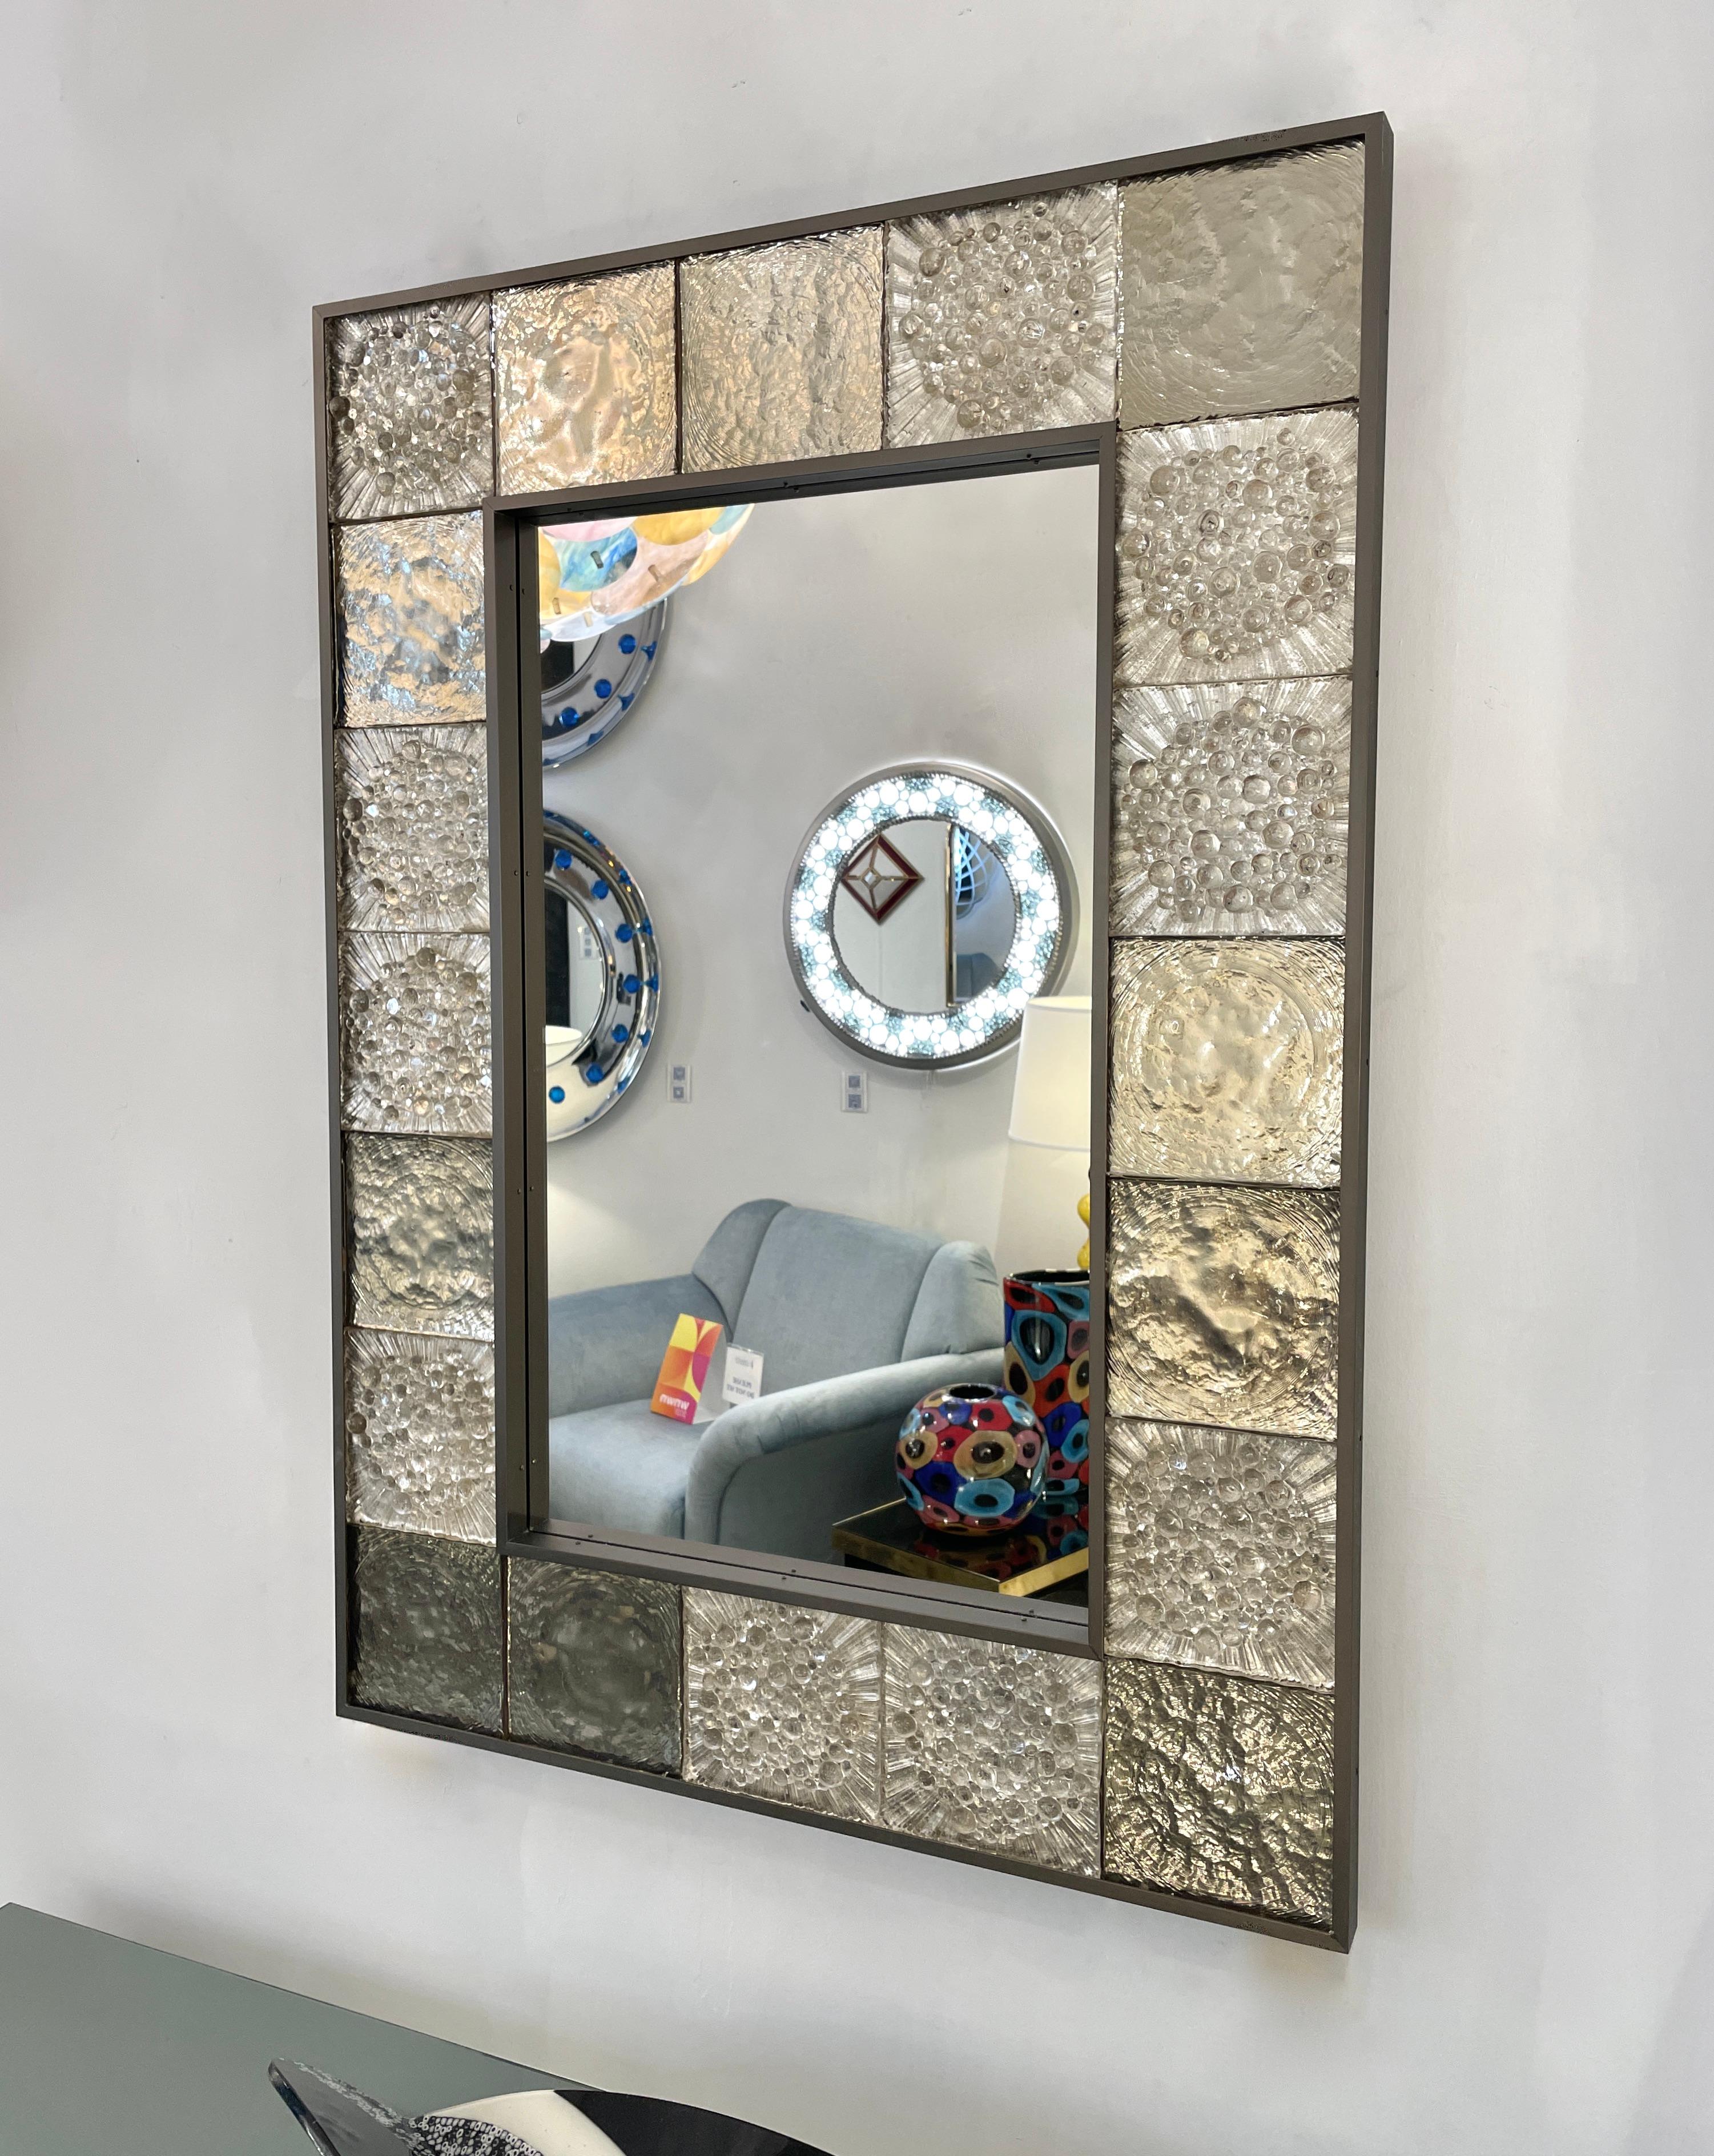 A contemporary customizable organic mirror with a sophisticated Industrial design, exclusive for Cosulich Interiors & Antiques, entirely handcrafted in Italy, a sculpture piece with exceptional craftsmanship and innovative production: the decorative